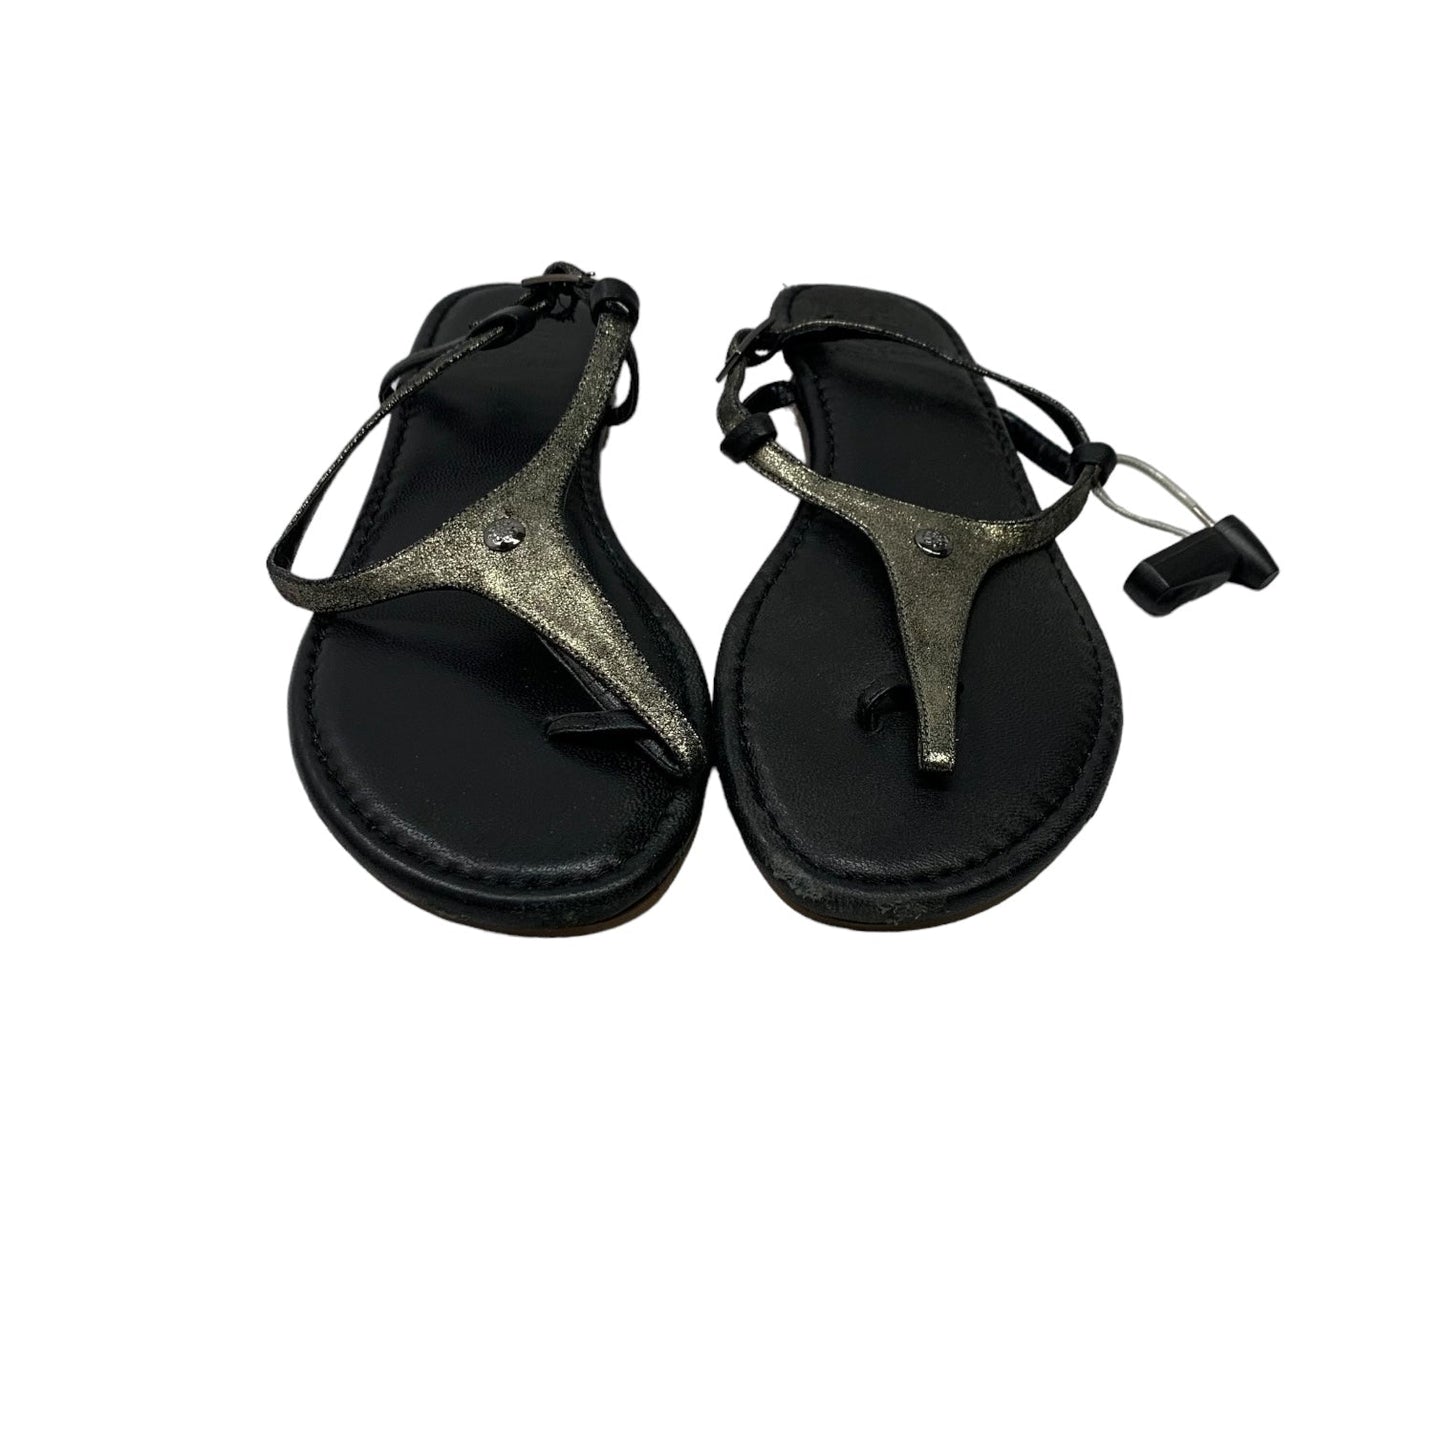 Sandals Flip Flops By Camibiami  Size: 9